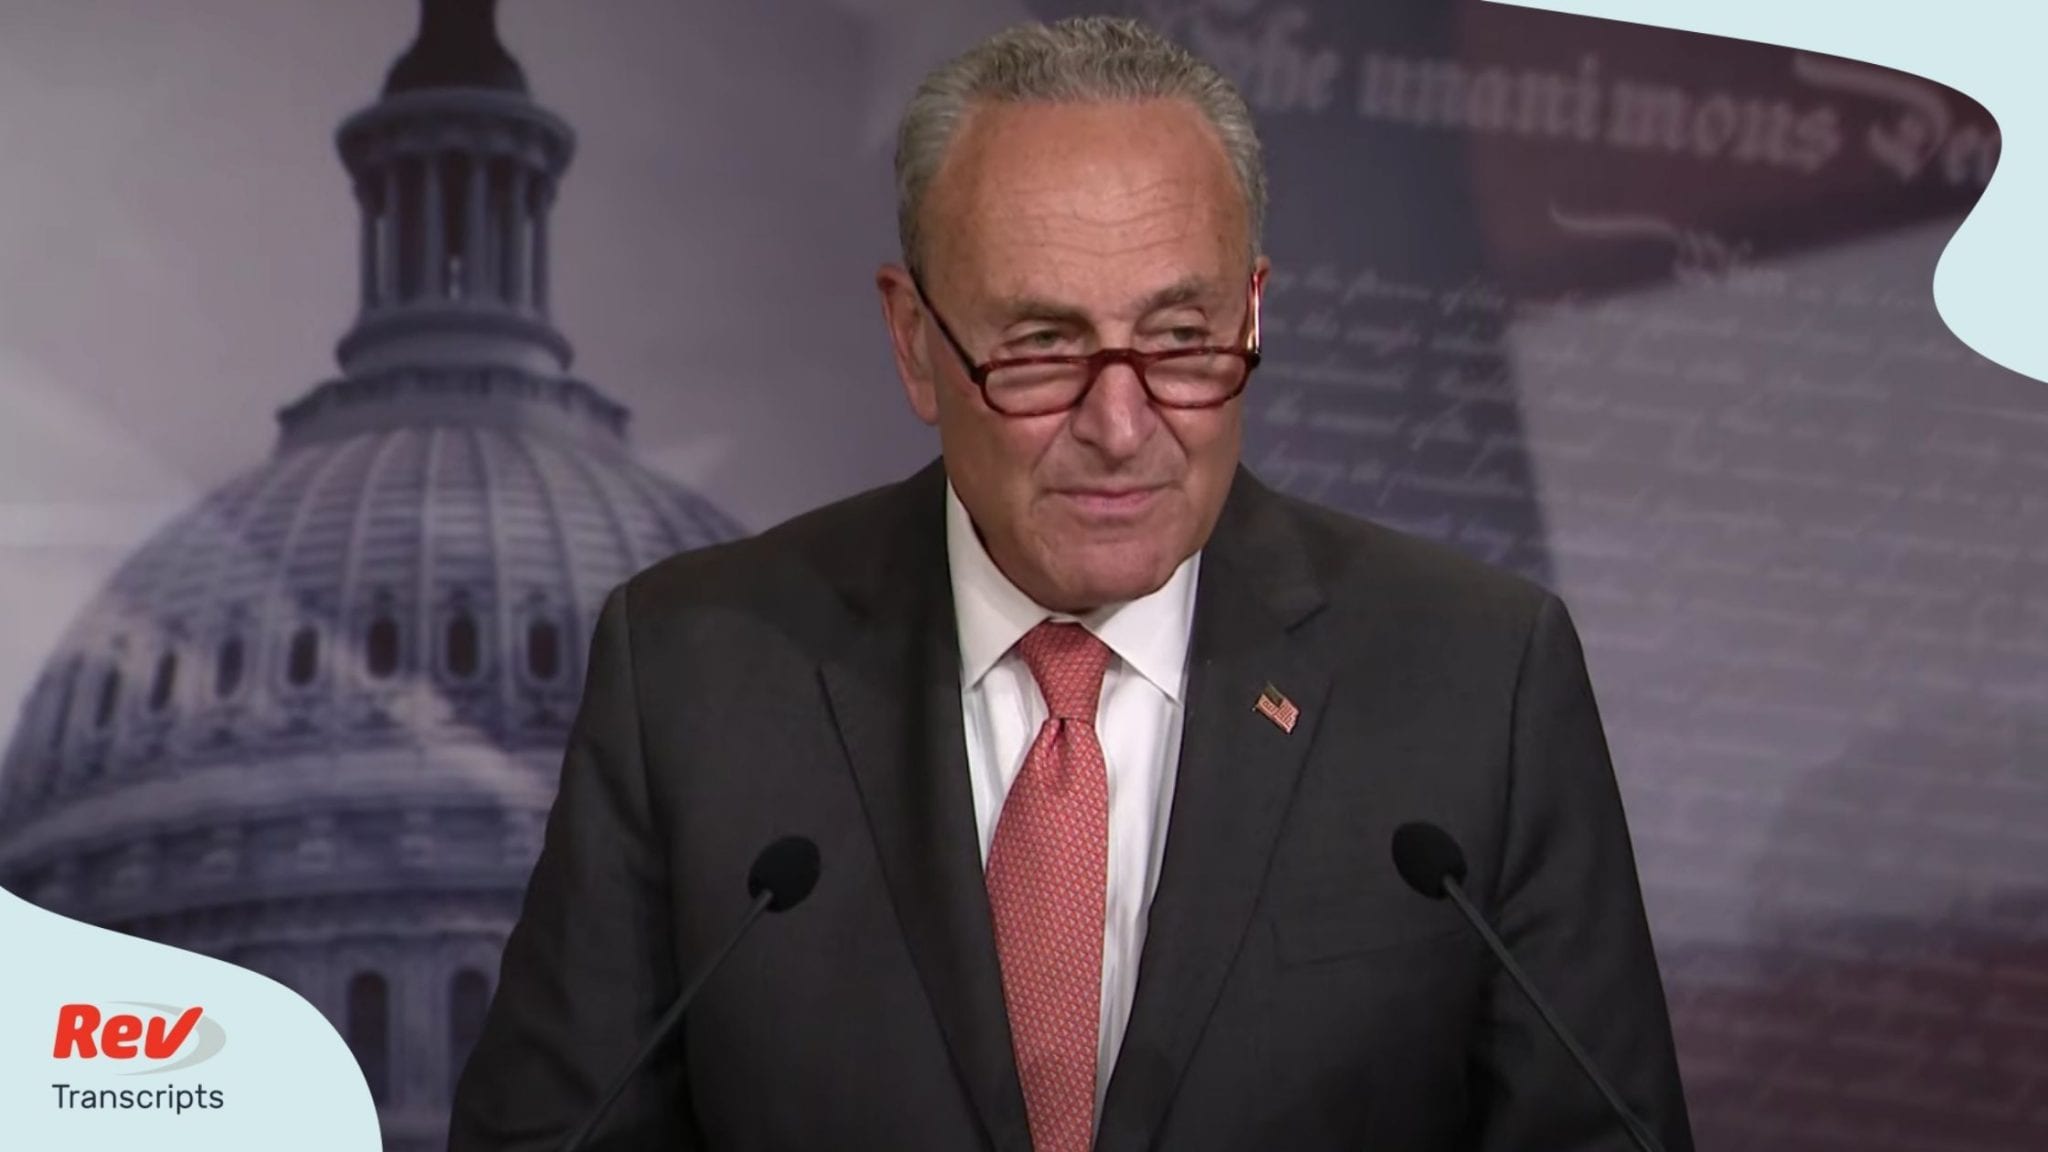 Chuck Schumer gave a press conference on July 21